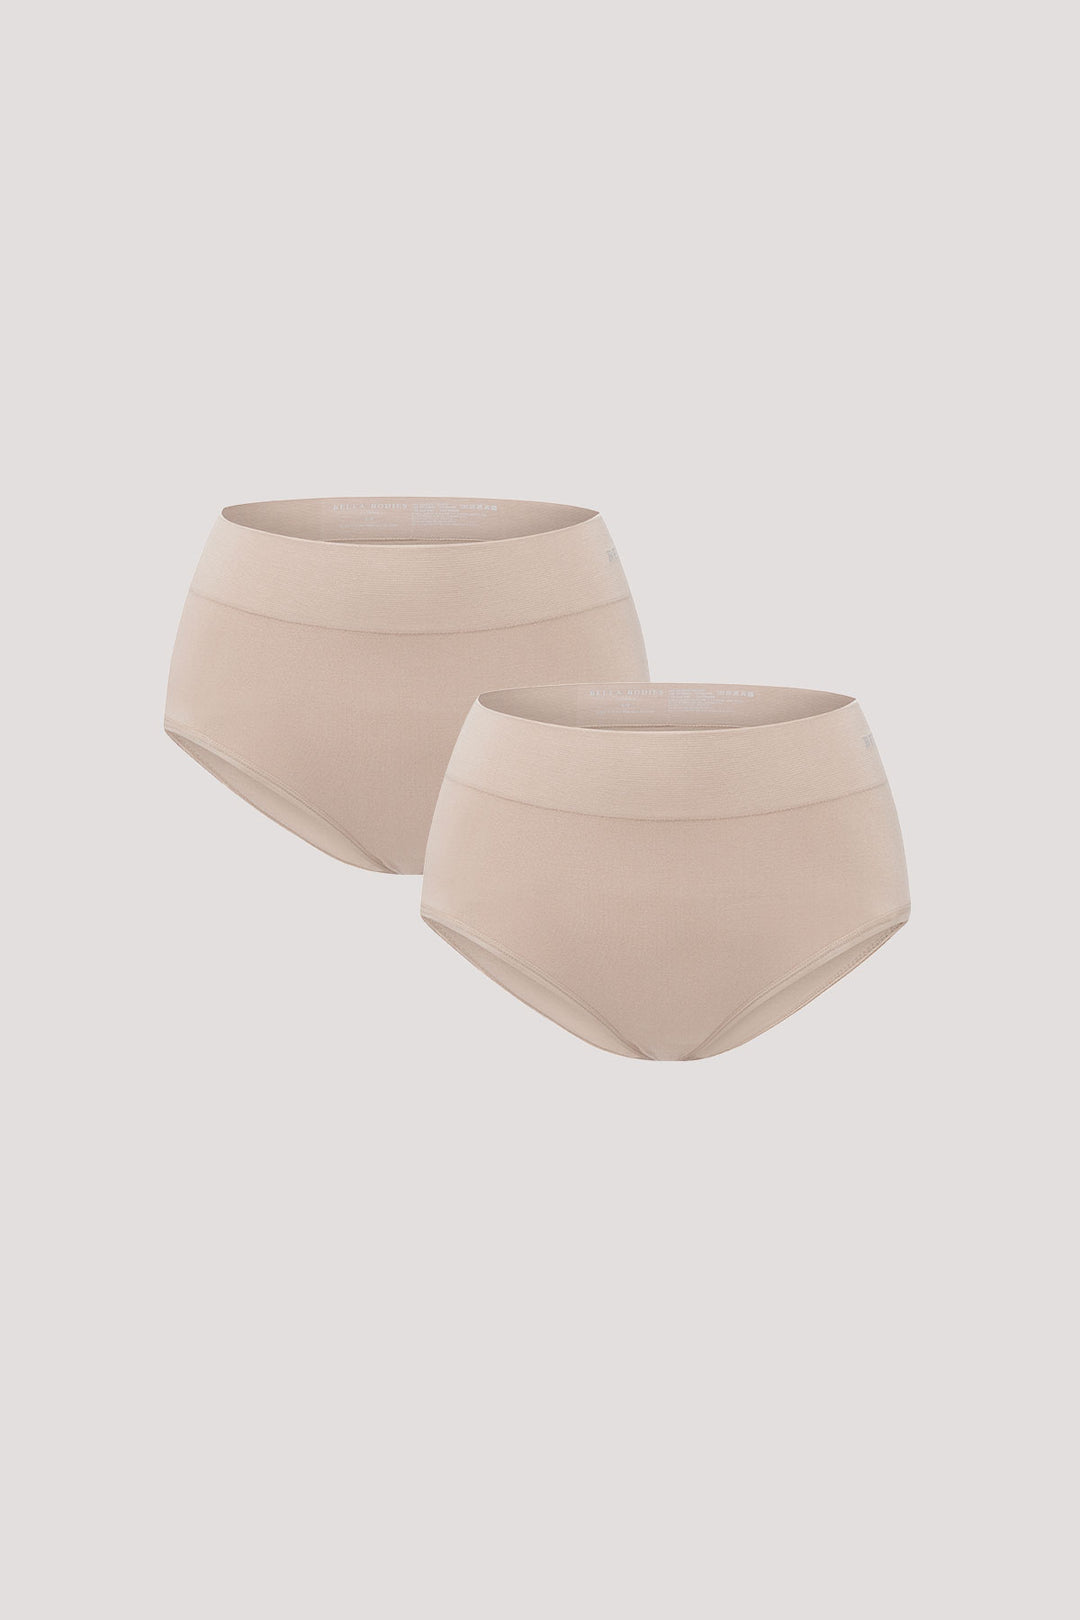  Women's Comfortable Sustainable Bamboo Underwear I Bella Bodies UK I Bamboo Knickers | sand and sand